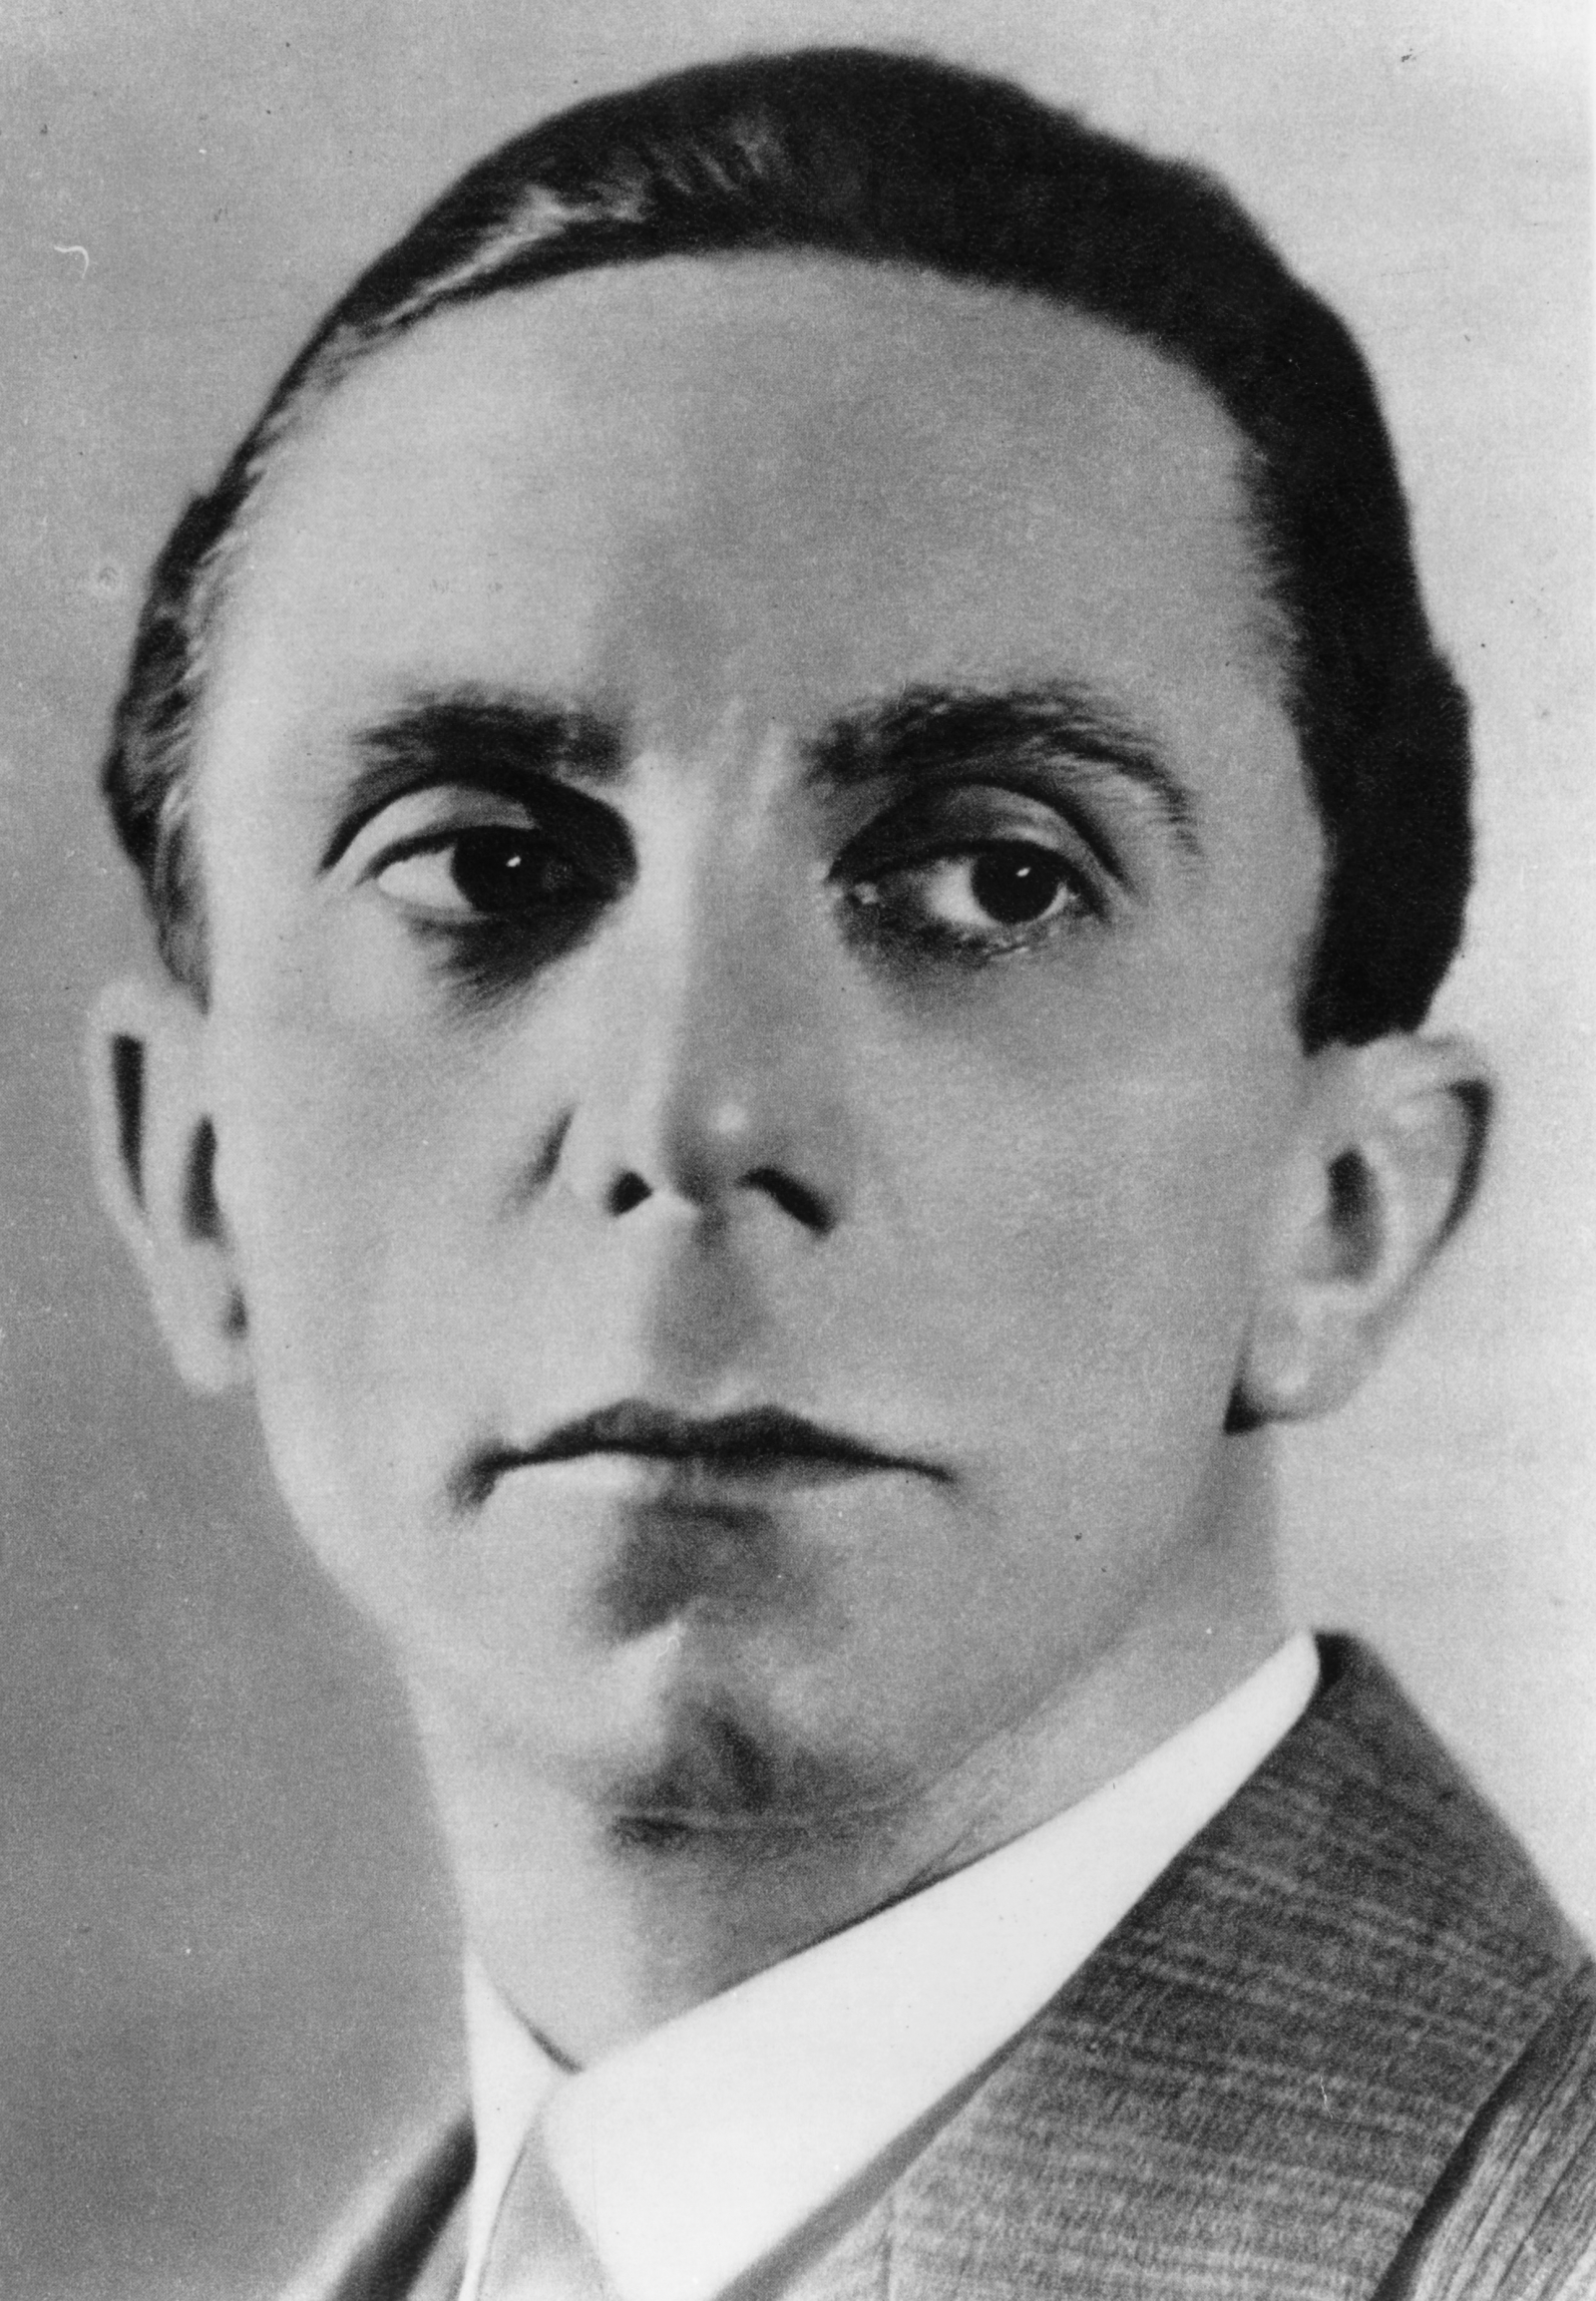 Joseph Goebbels' estate sues publisher for printing quotes from Nazi